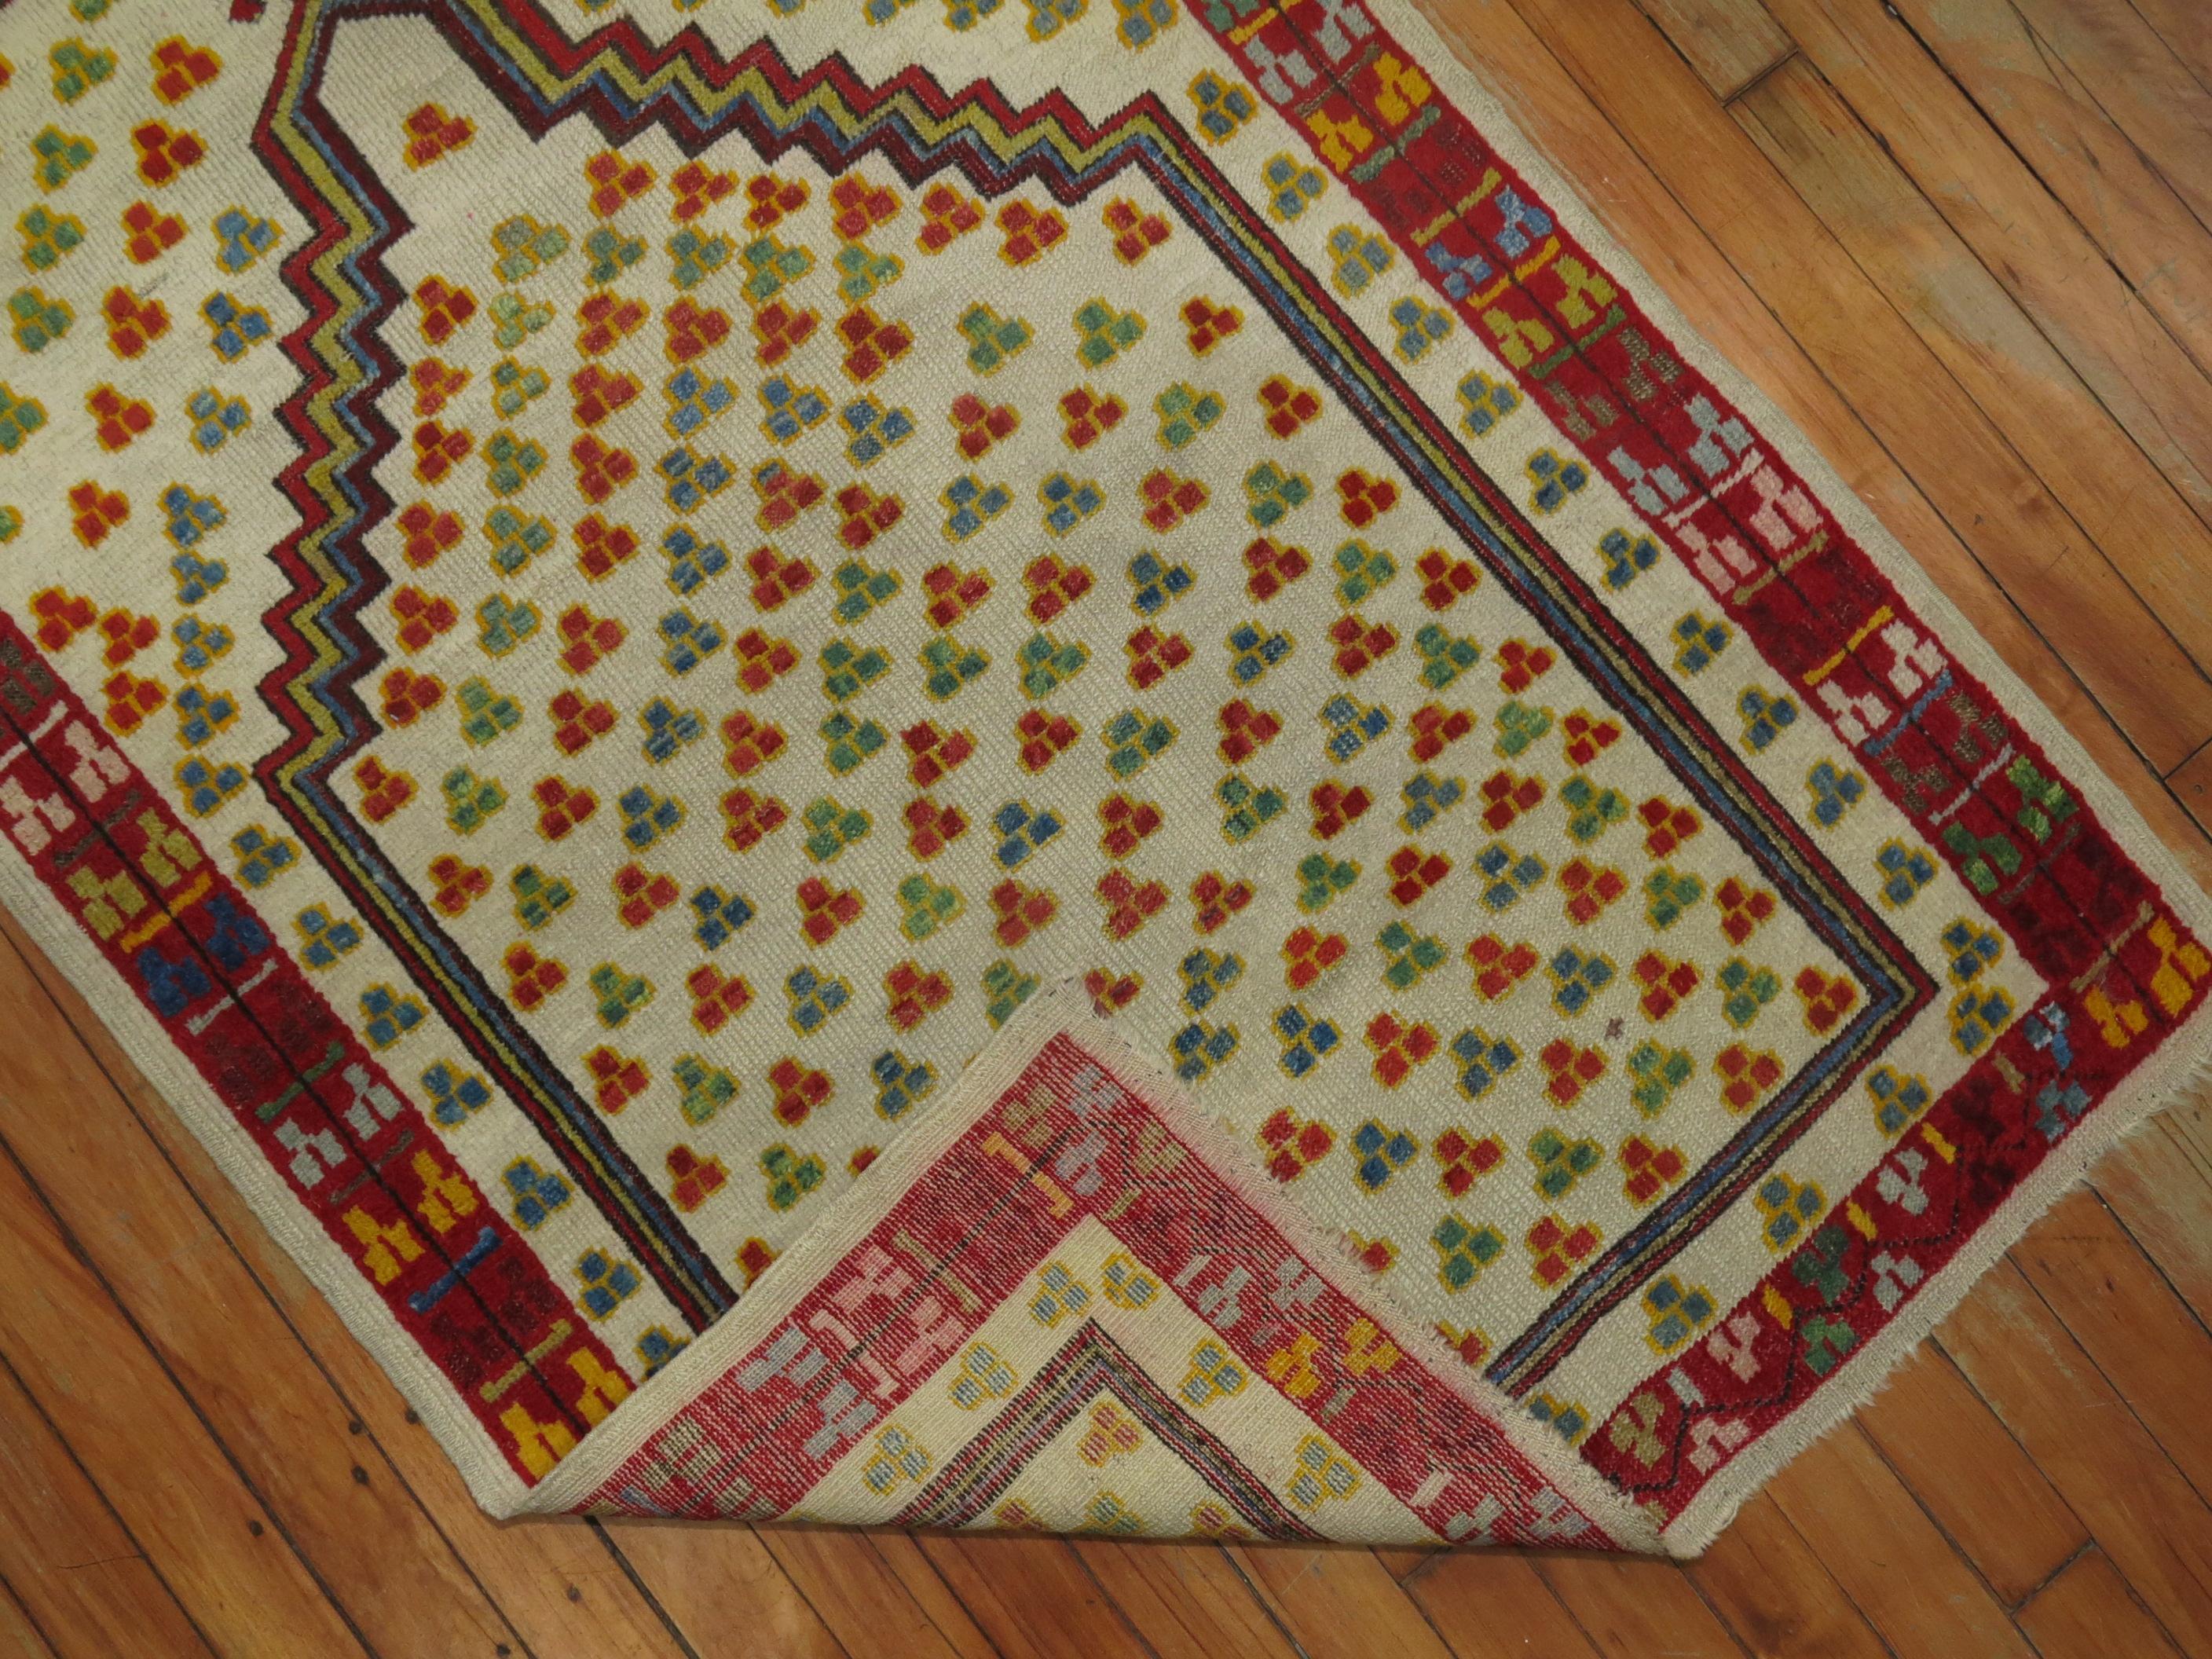 Early 20th century Turkish ghiordes prayer rug. Very colorful and petite.